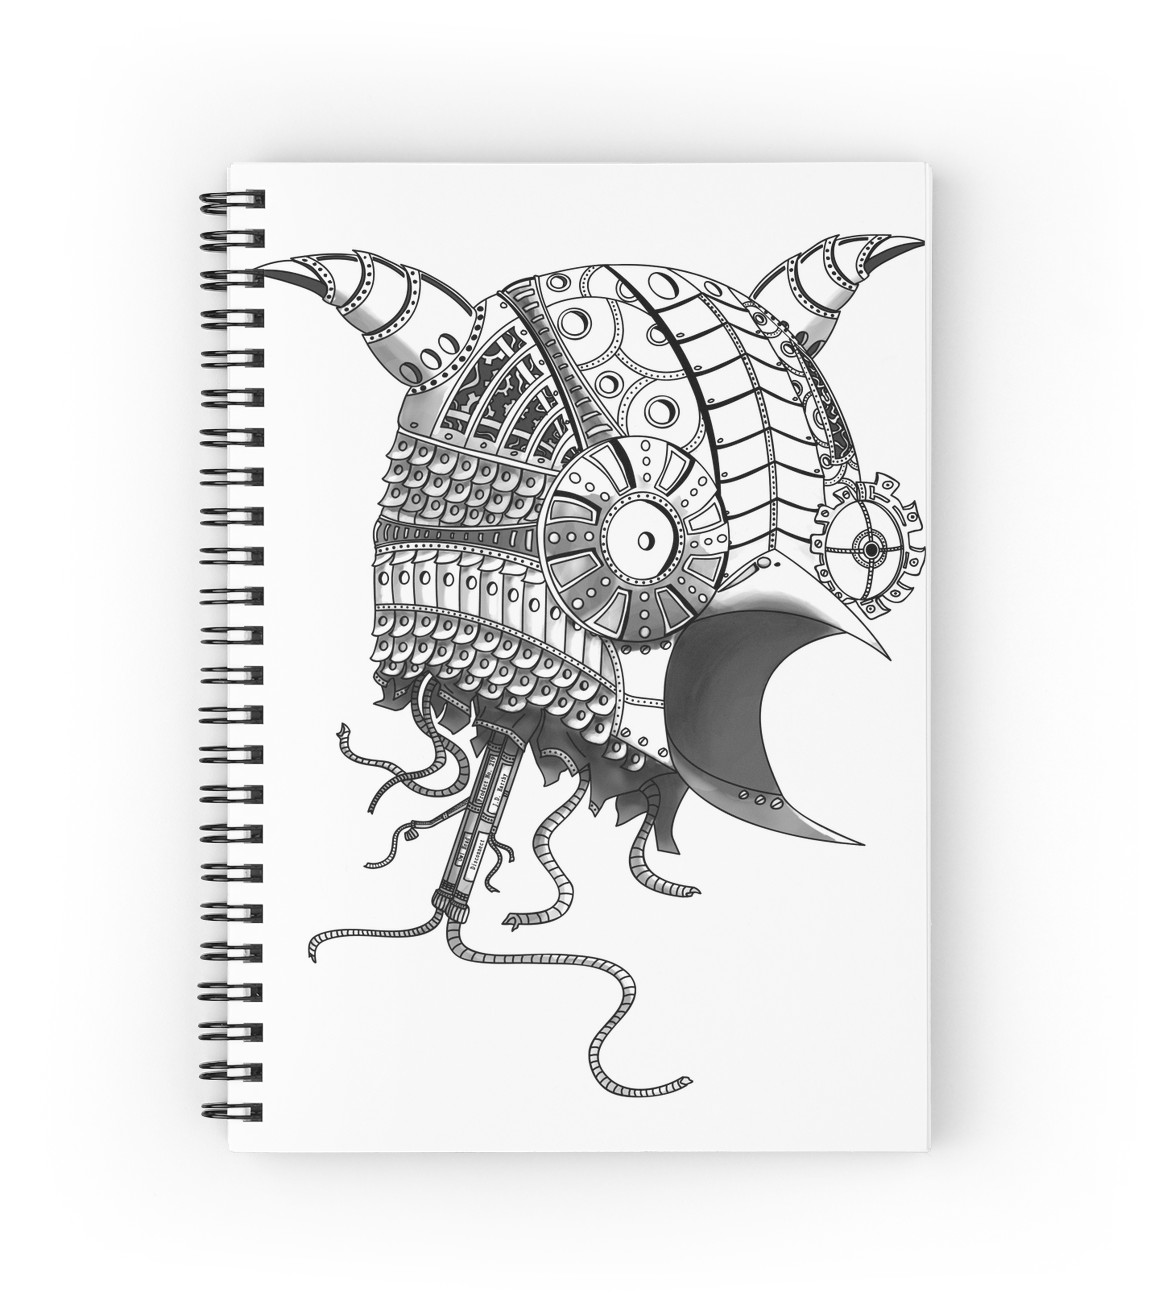 Spiral Notebook Drawing at GetDrawings Free download